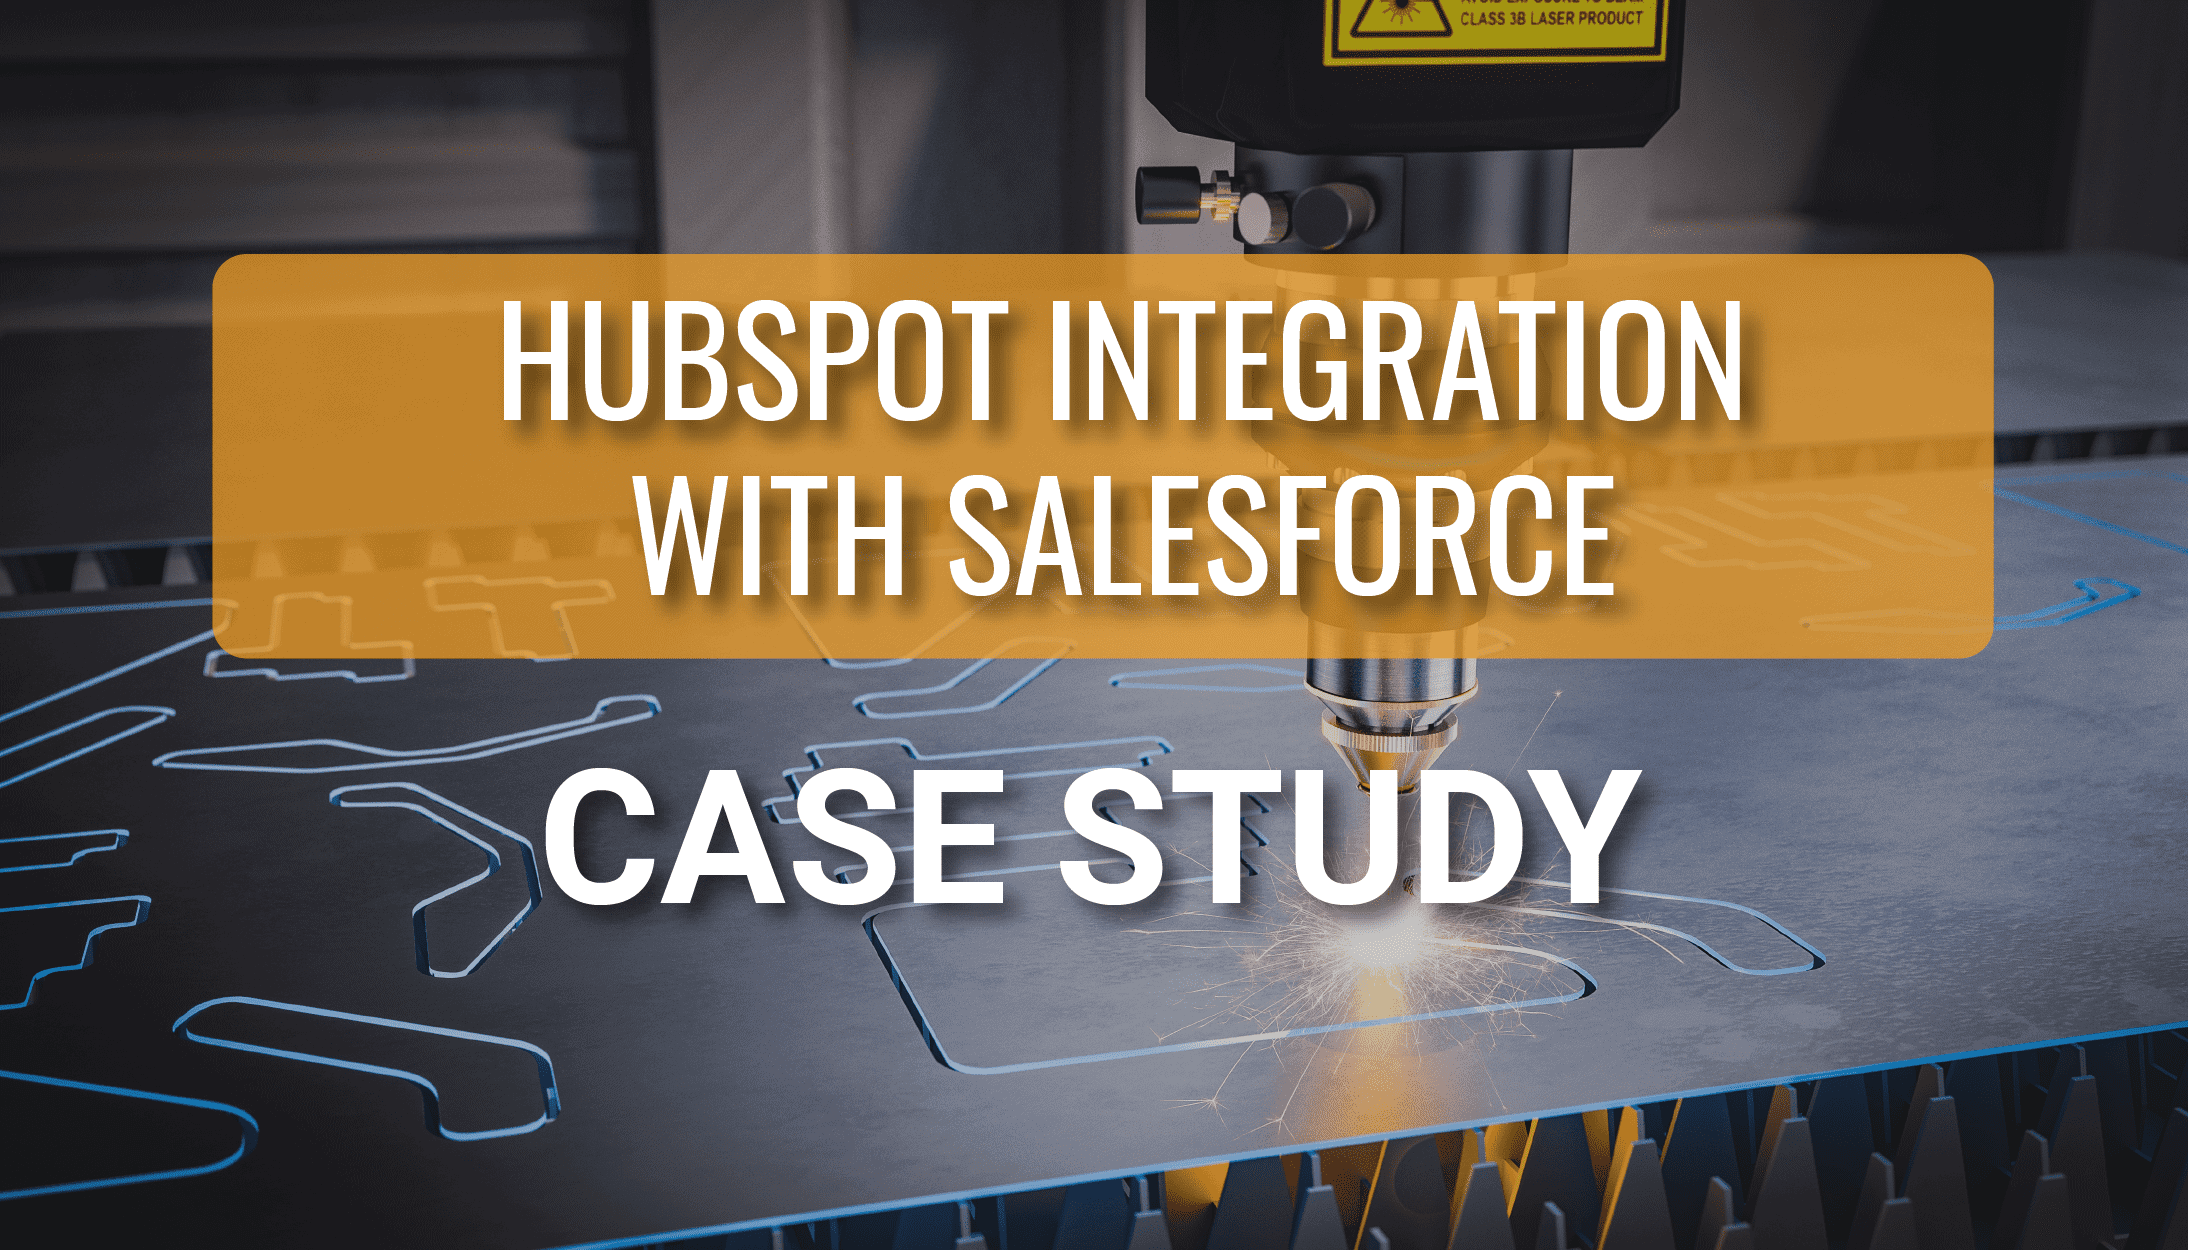 Salesforce case study for life sciences